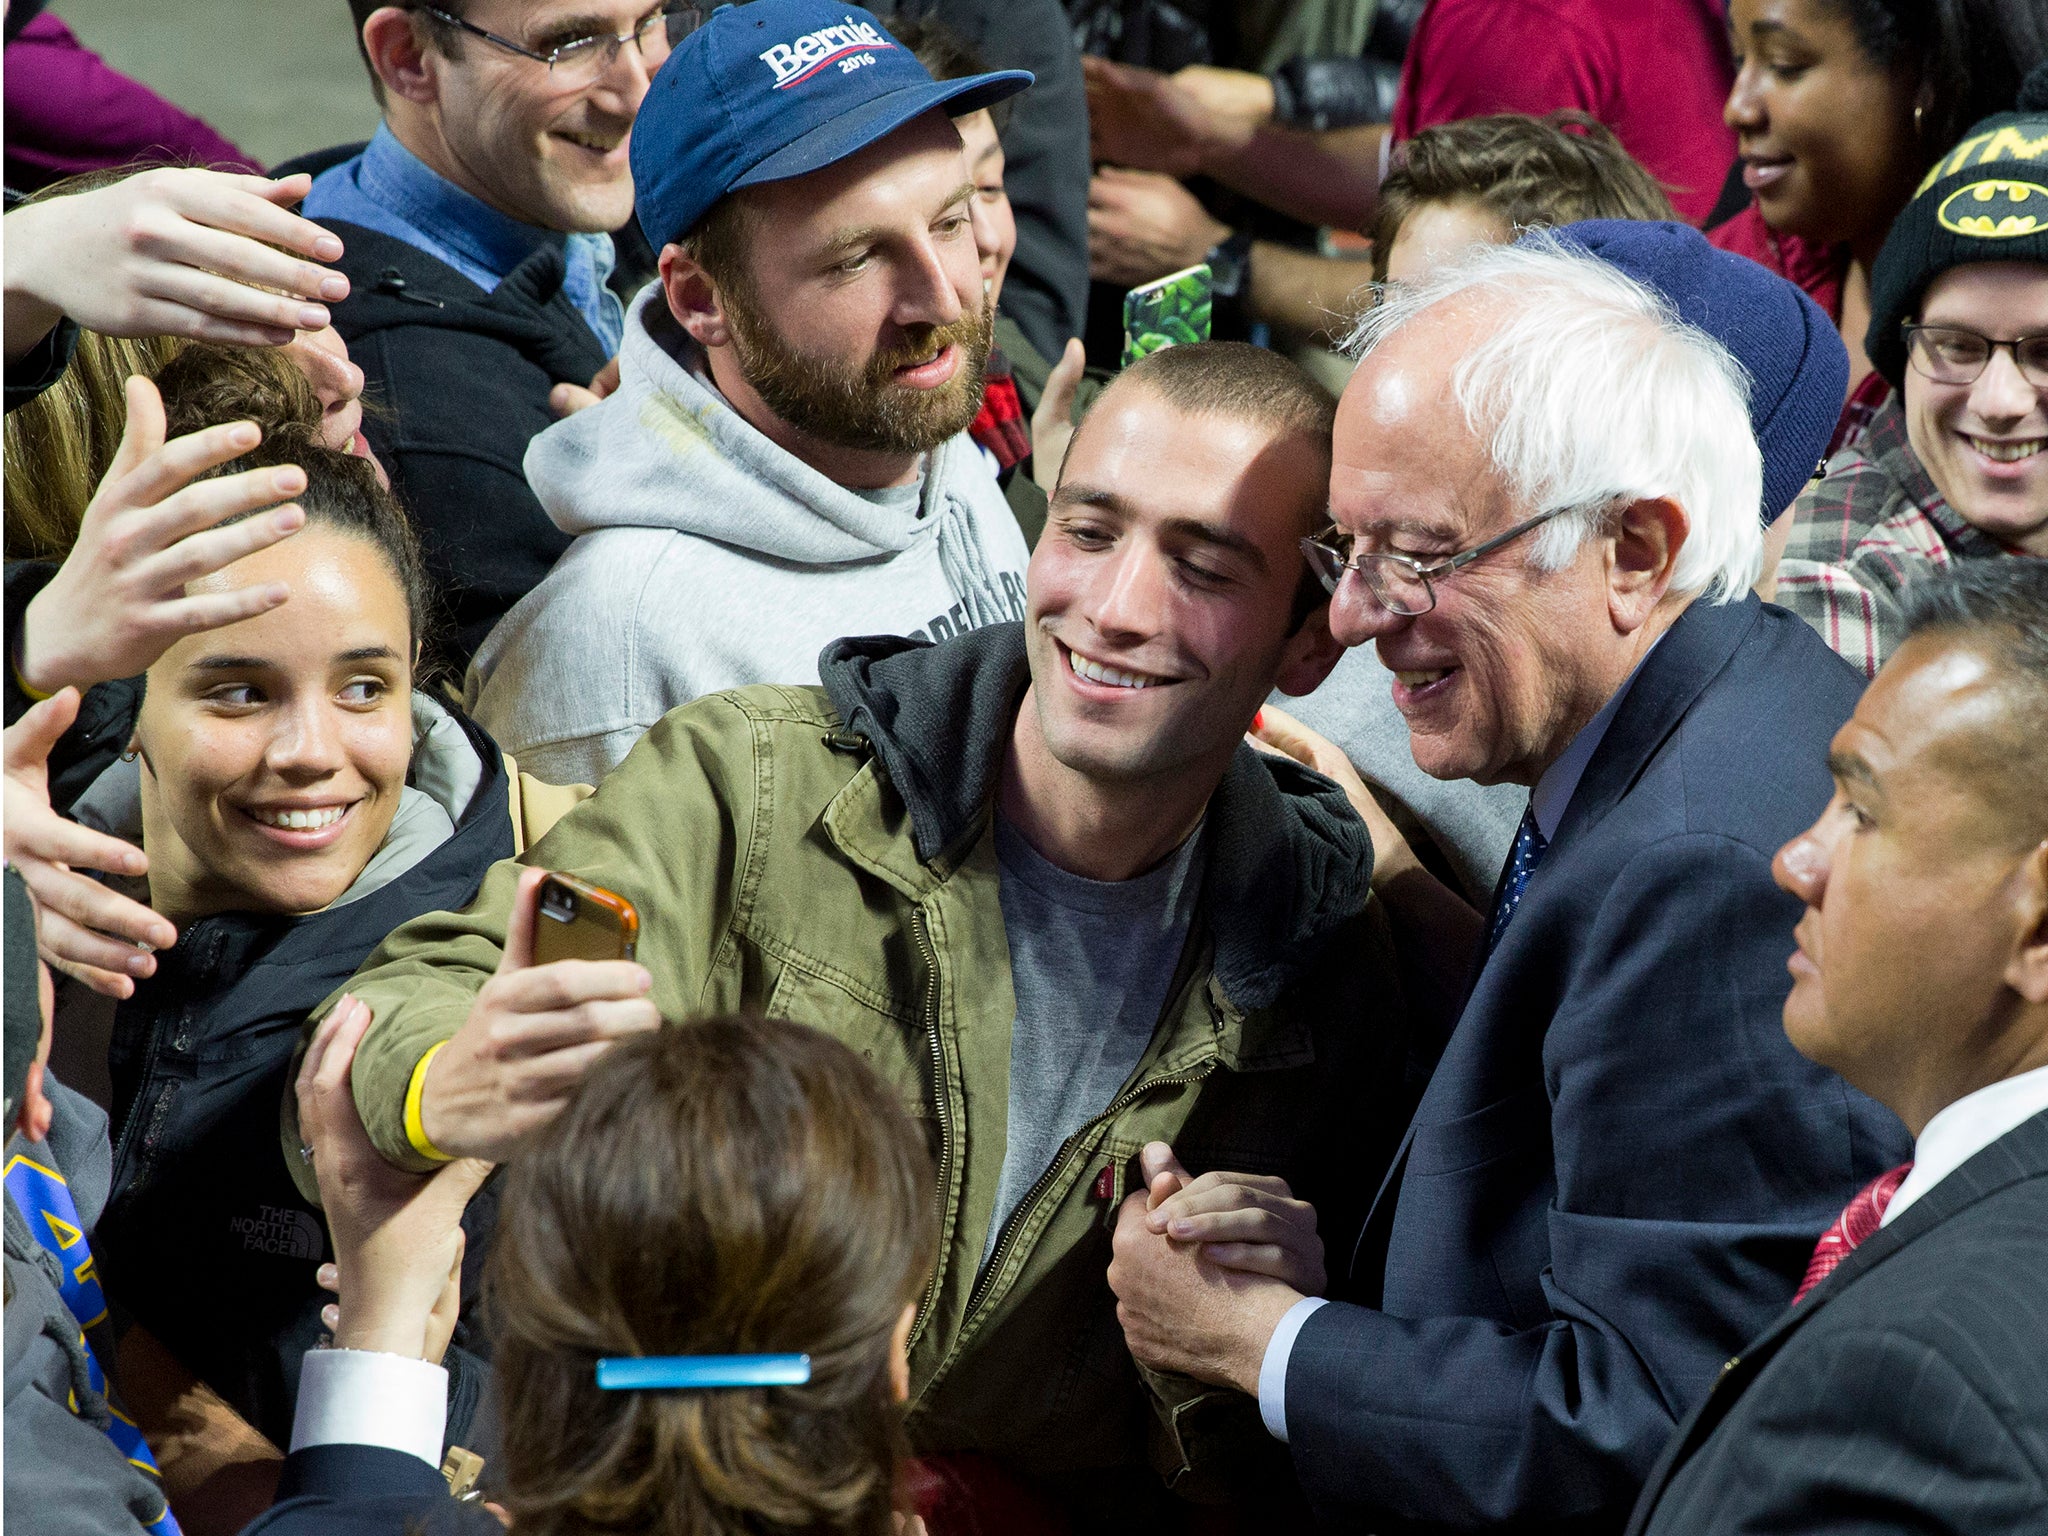 Bernie Sanders has more supporters under the age of 30 than Clinton and Trump combined